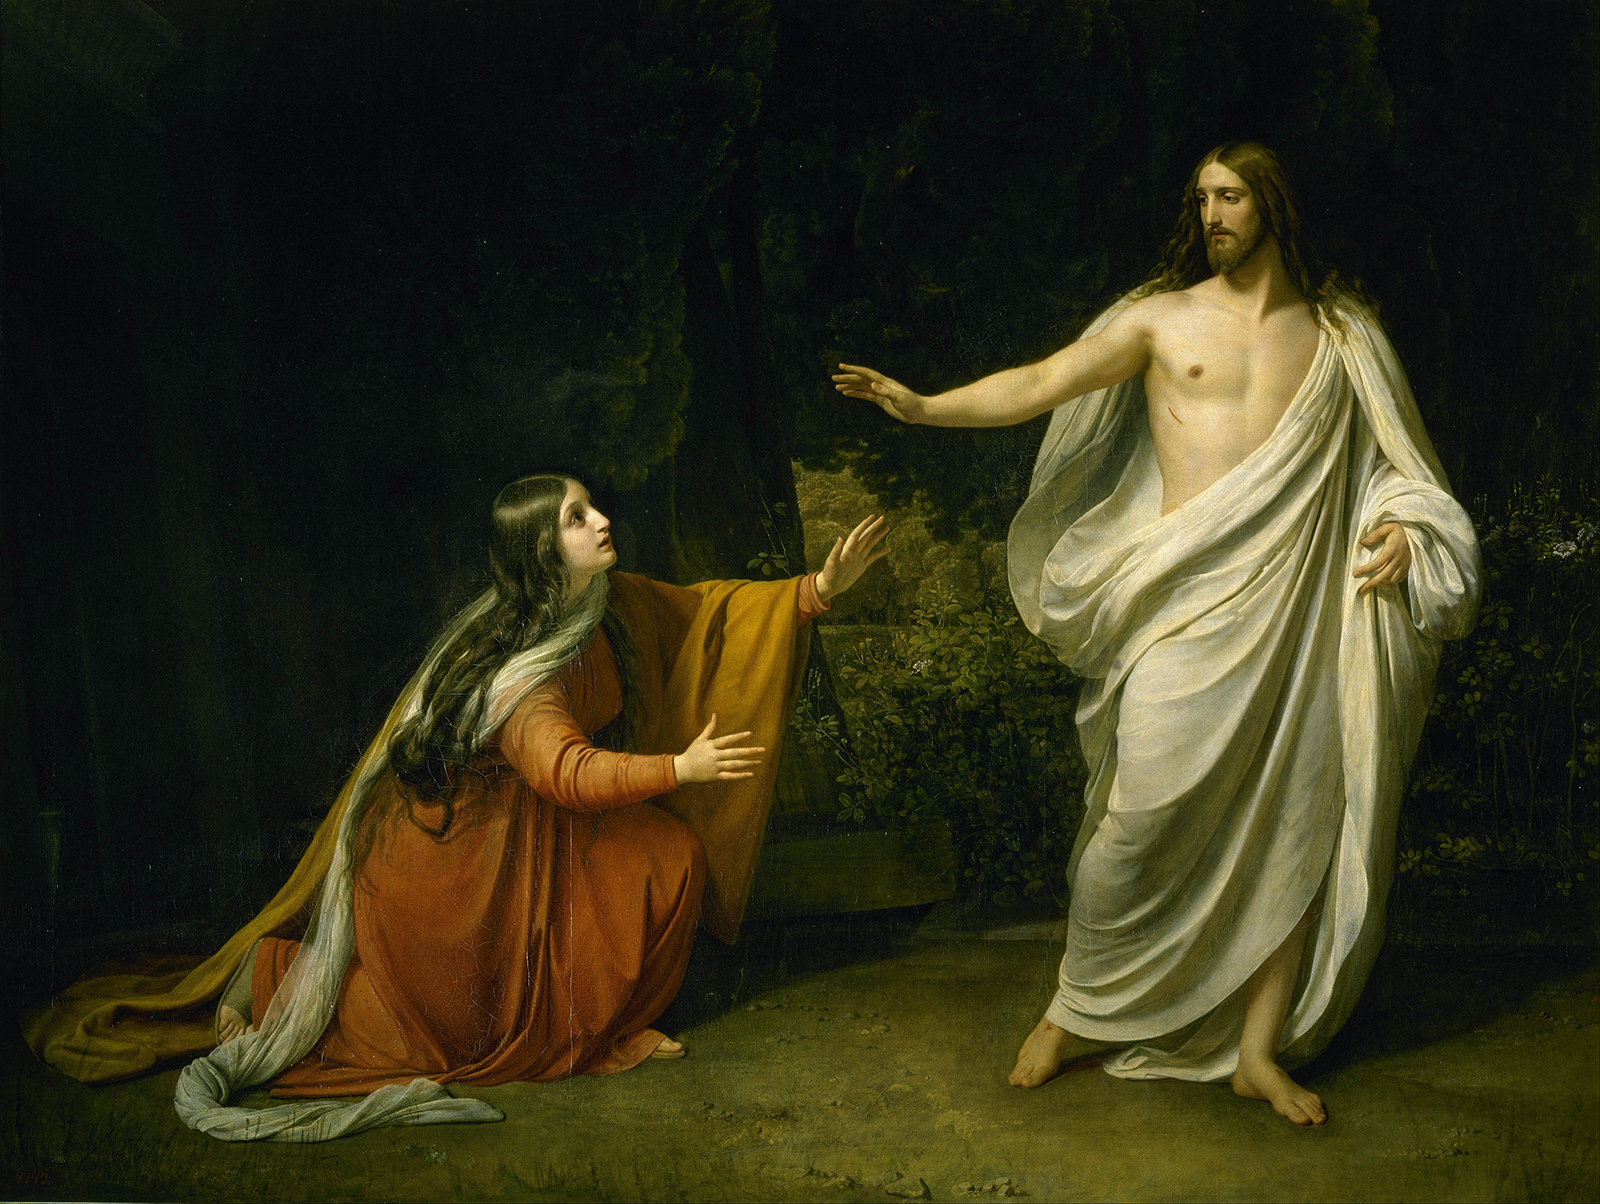 Painting from 1835 by artist Alexander Ivanov "Appearance of Christ to Mary Magdalene after the Resurrection ”.  Image courtesy of Creative Commons